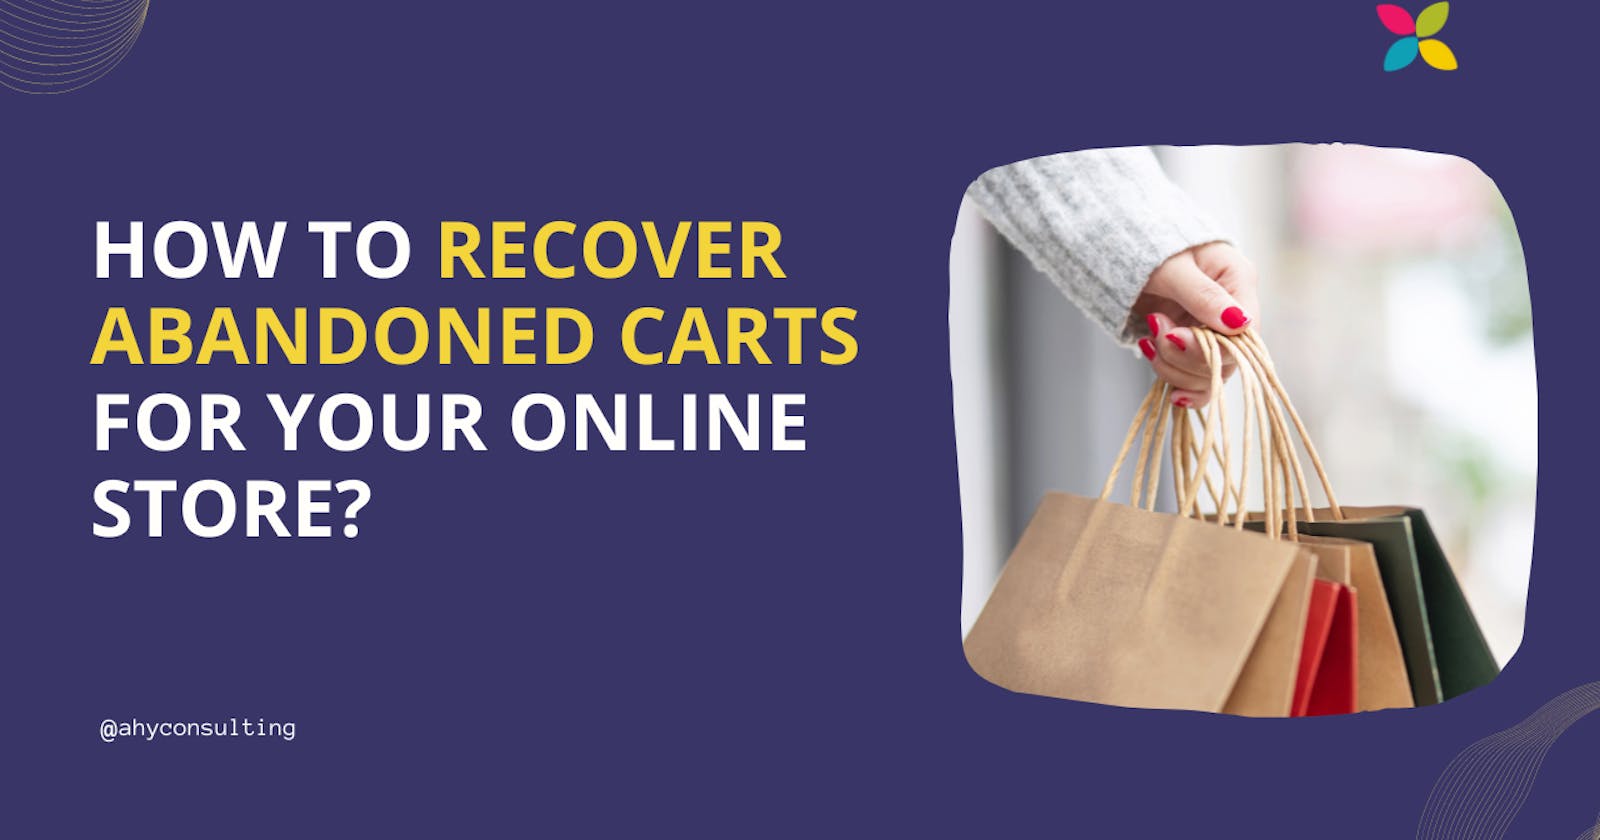 How to Recover Abandoned Carts for your Online Store?